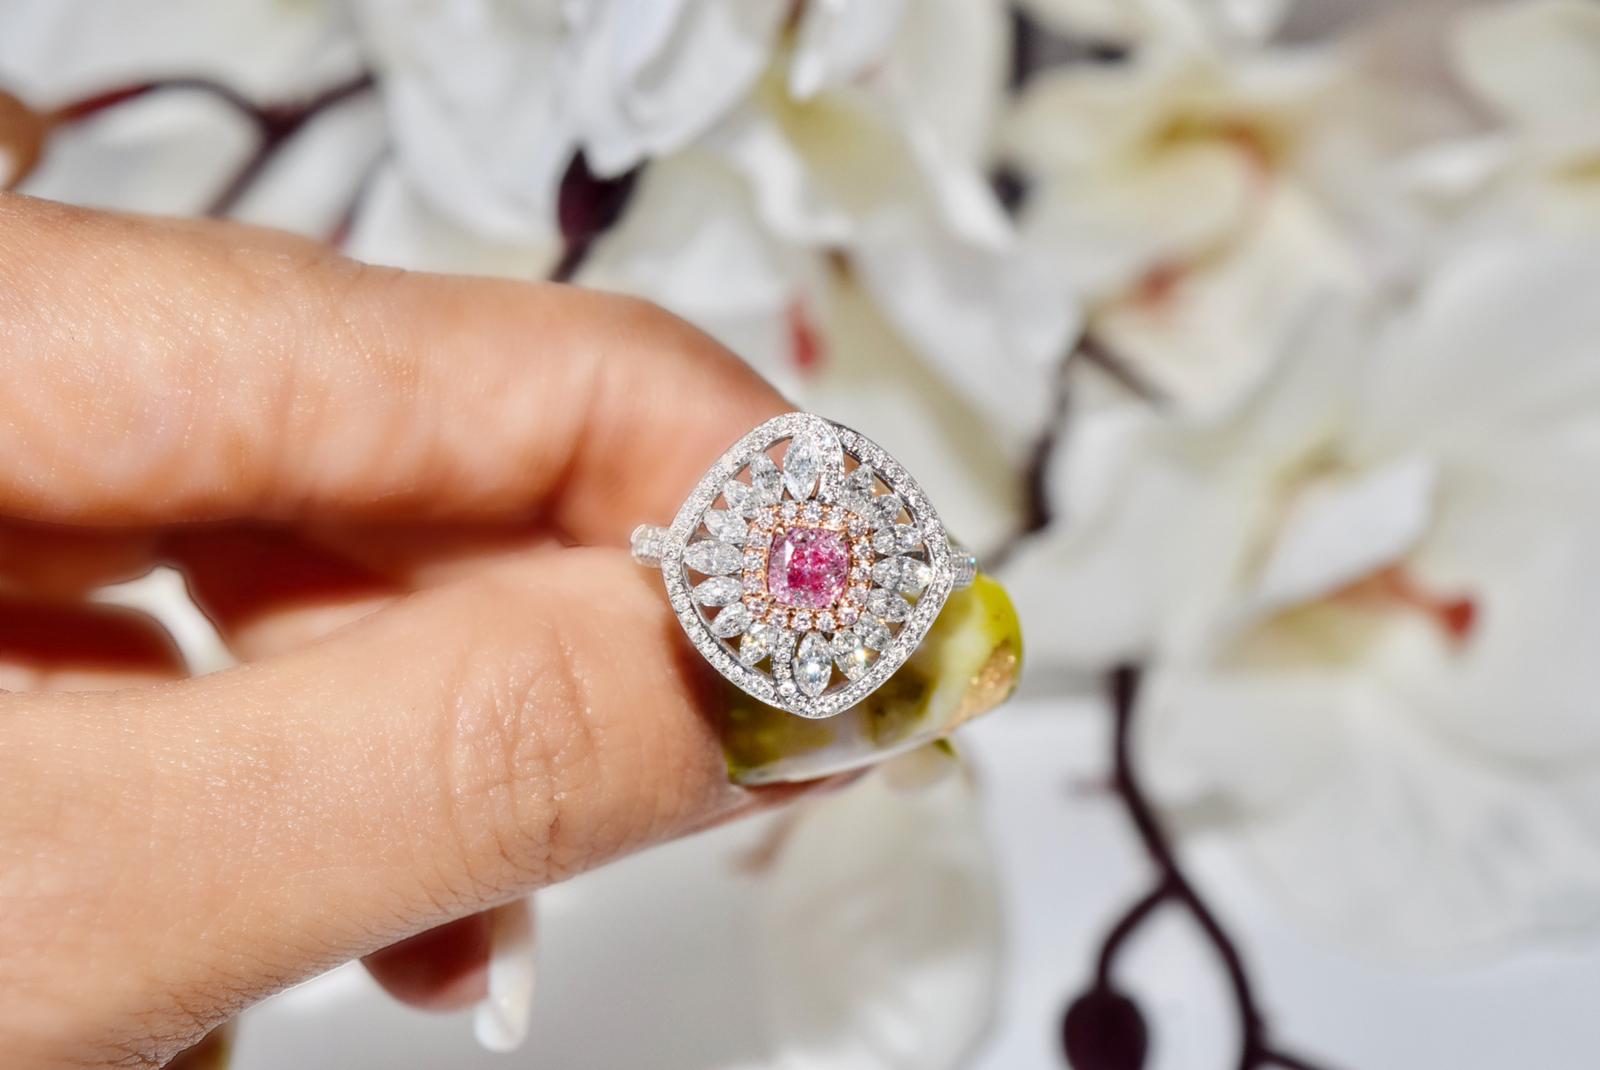 **100% NATURAL FANCY COLOUR DIAMOND JEWELLERIES**

✪ Jewelry Details ✪

♦ MAIN STONE DETAILS

➛ Stone Shape: Cushion
➛ Stone Color: Faint Pink
➛ Stone Weight: 0.43 carat
➛ Clarity: I2
➛ GIA certified

♦ SIDE STONE DETAILS

➛ Side Marquise diamond -